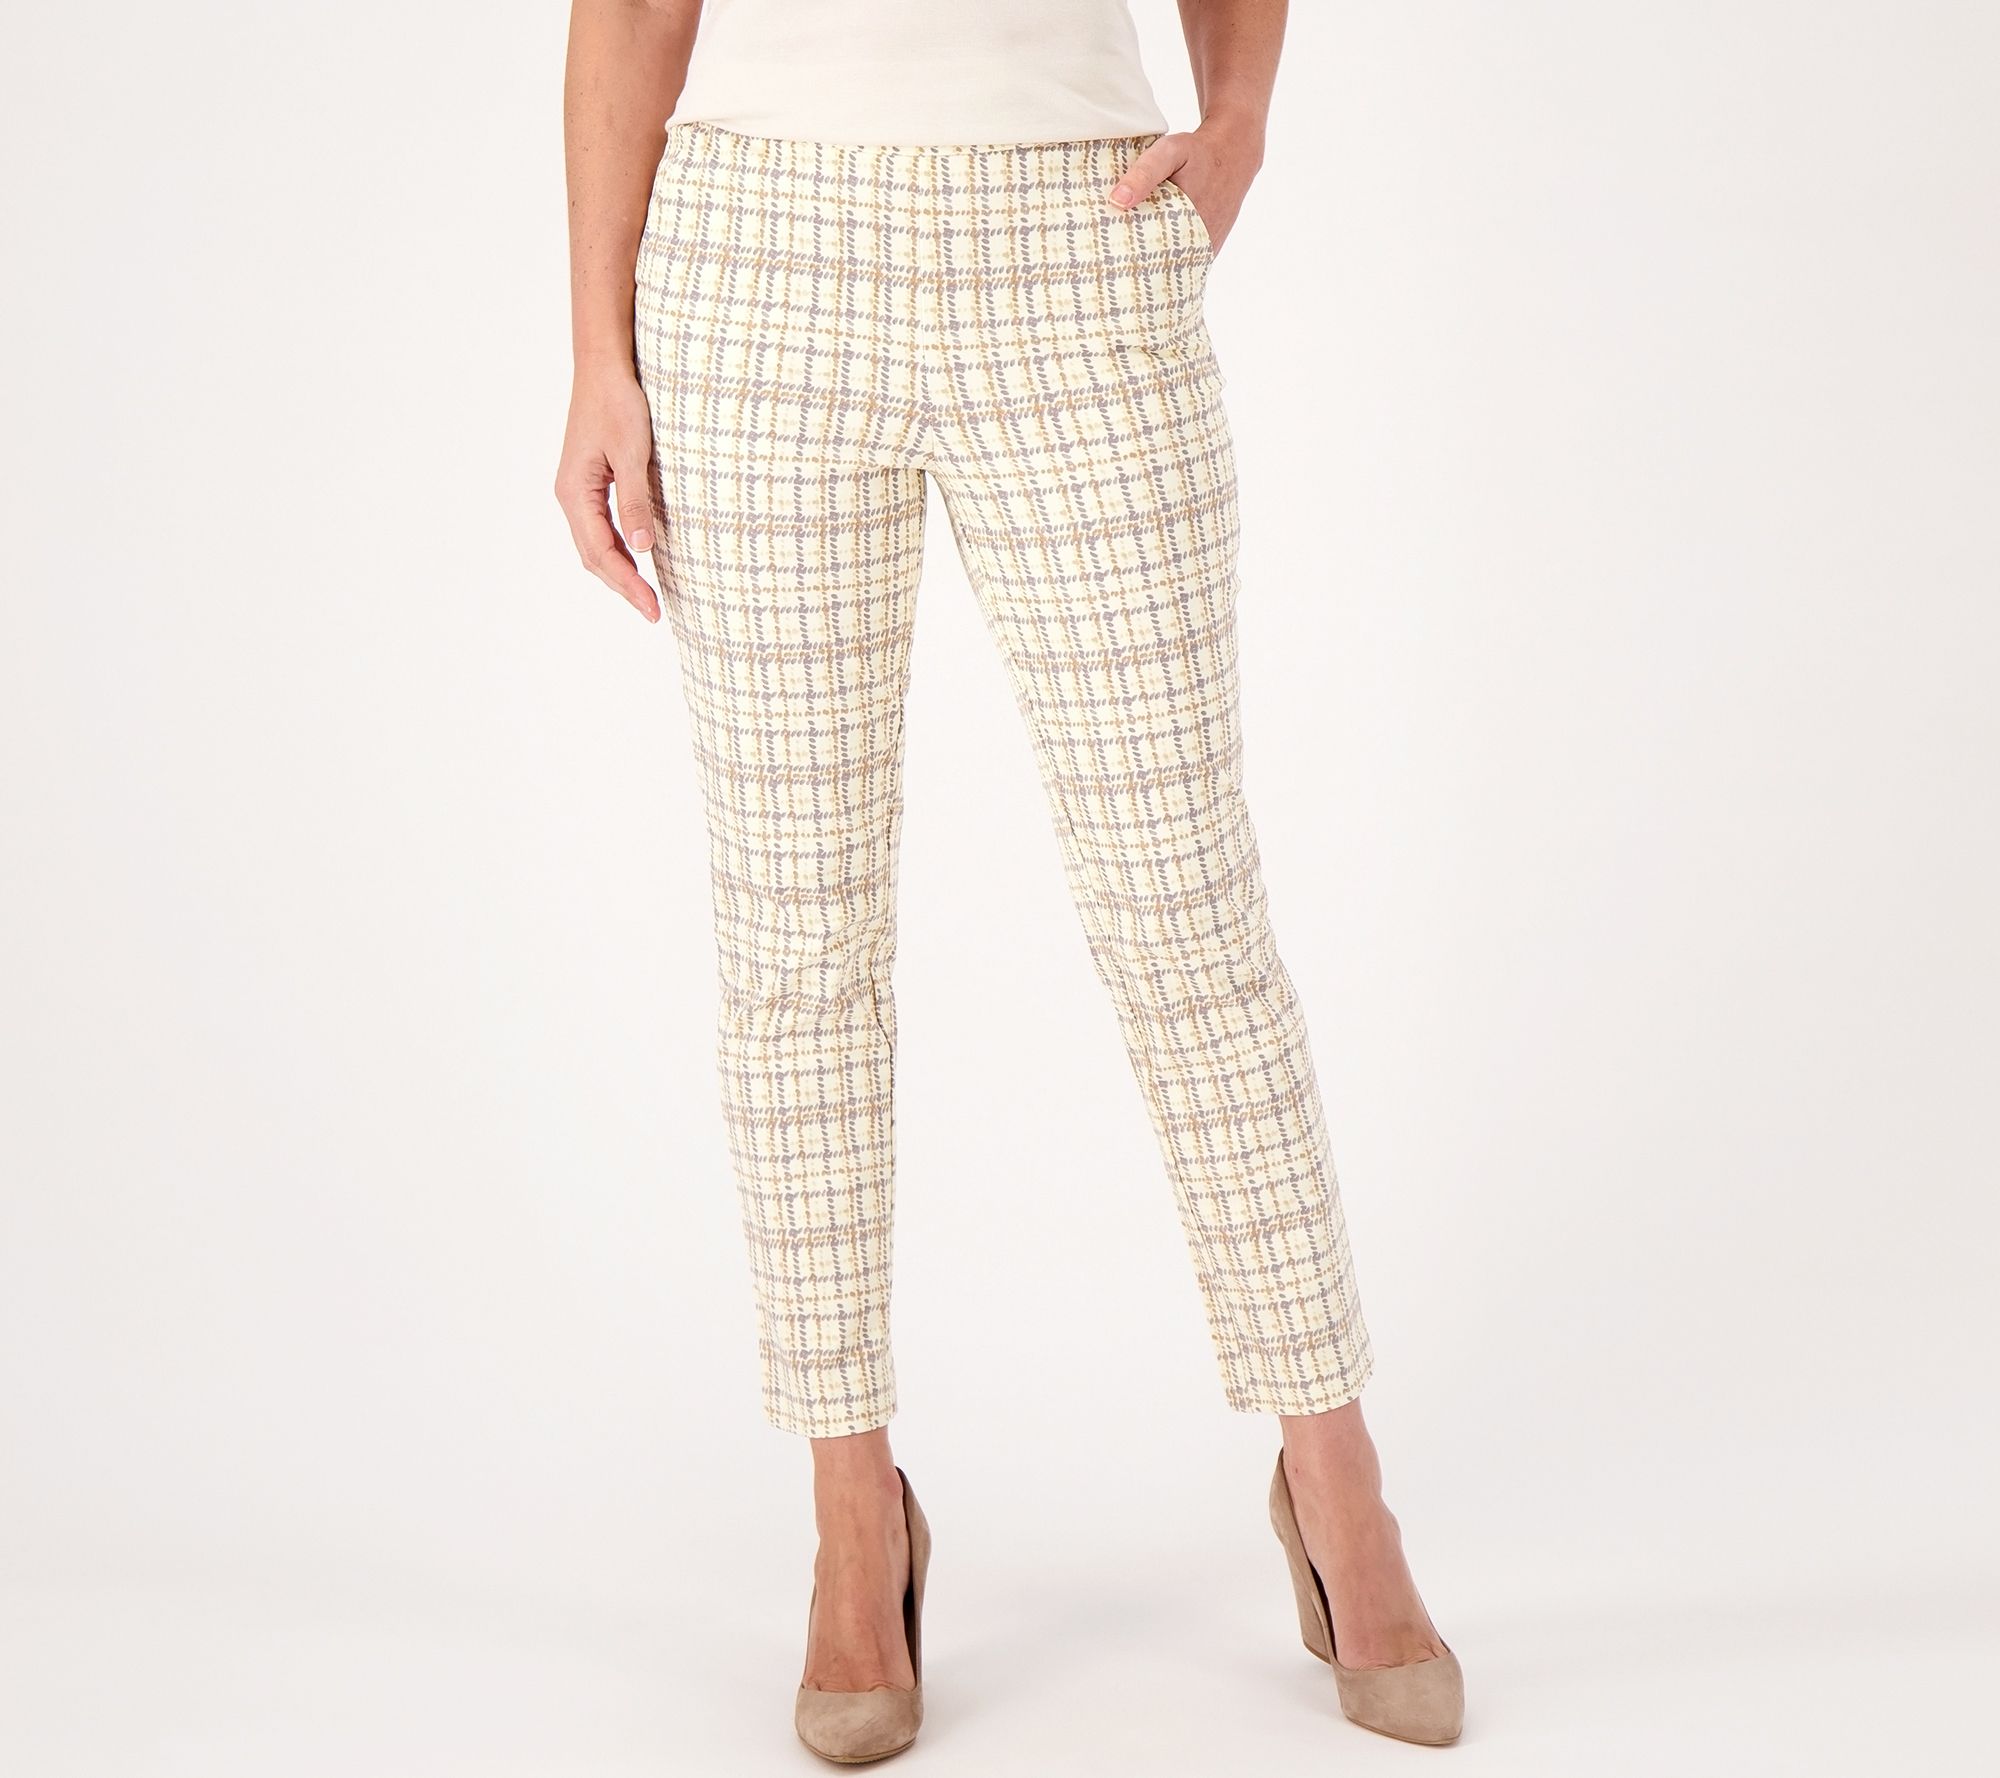 Clothing & Shoes - Bottoms - Pants - Isaac Mizrahi 24/7 Foundation Stretch  Slim Ankle Pant - Online Shopping for Canadians